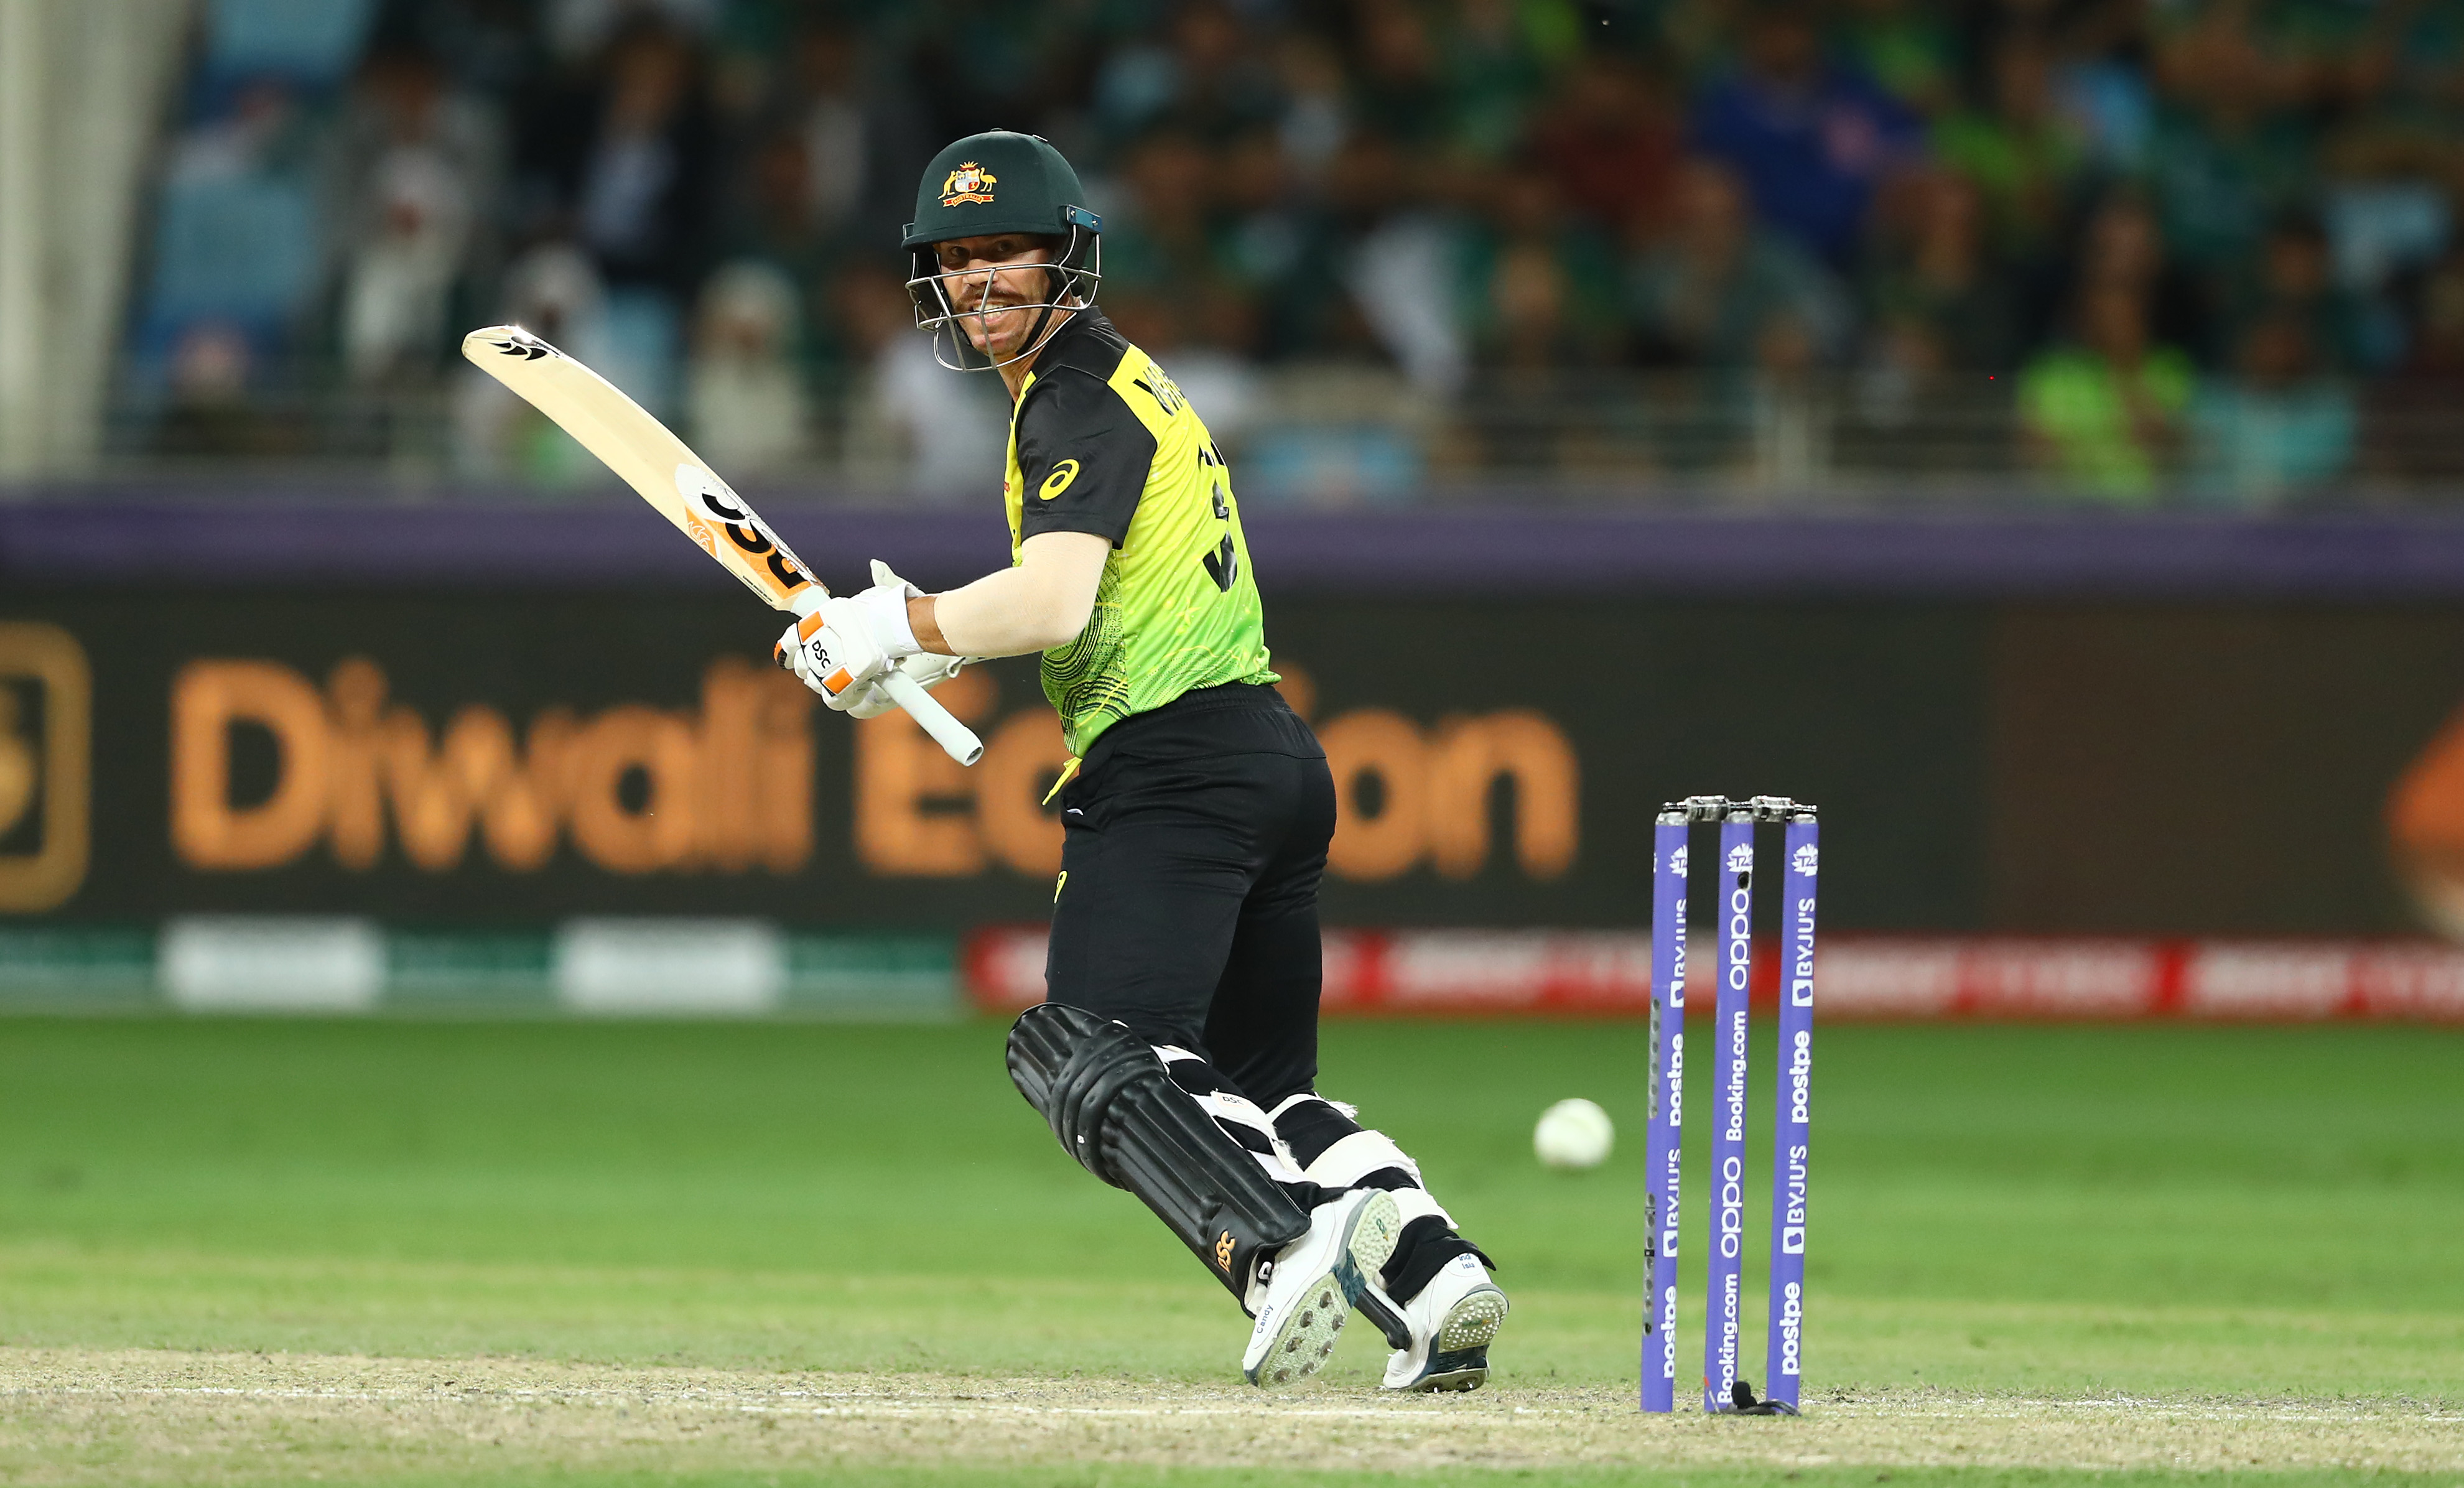 T20 World Cup 2021 | VIDEO: David Warner strikes six off double-bounce no-ball from Mohammad Hafeez